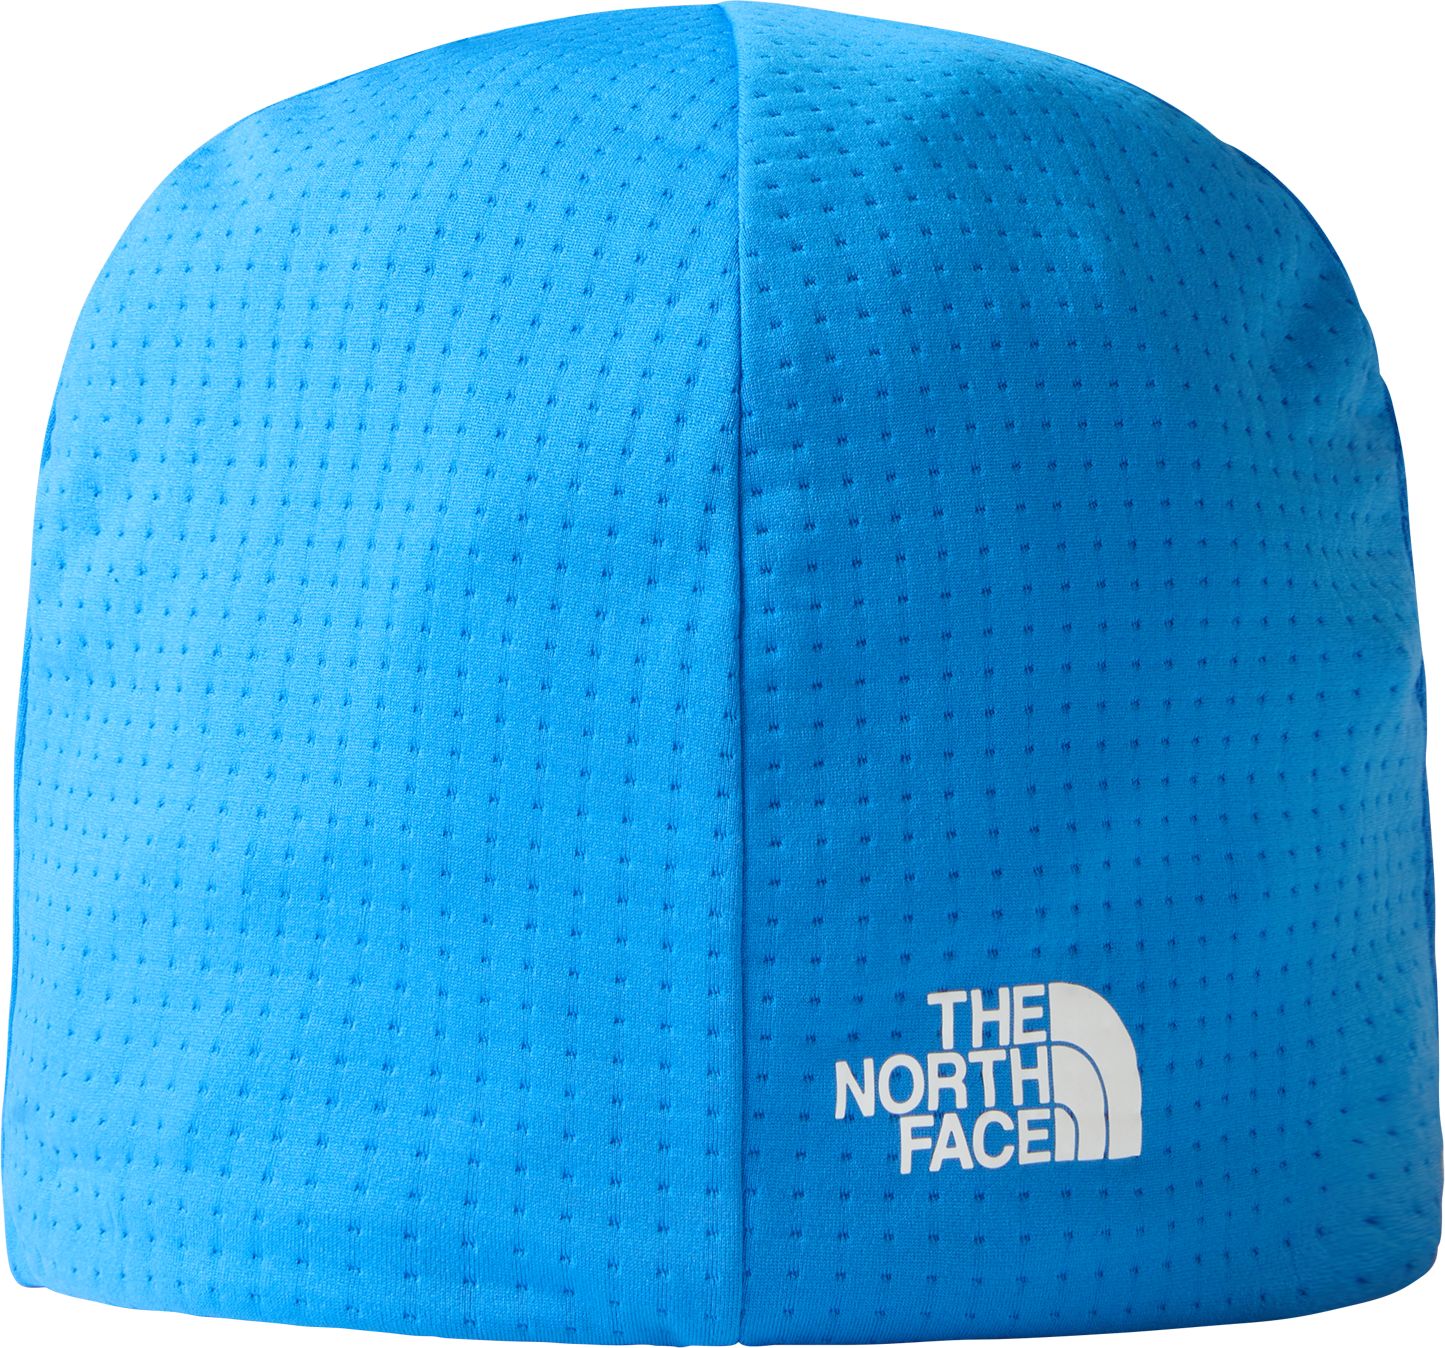 THE NORTH FACE, FASTECH BEANIE